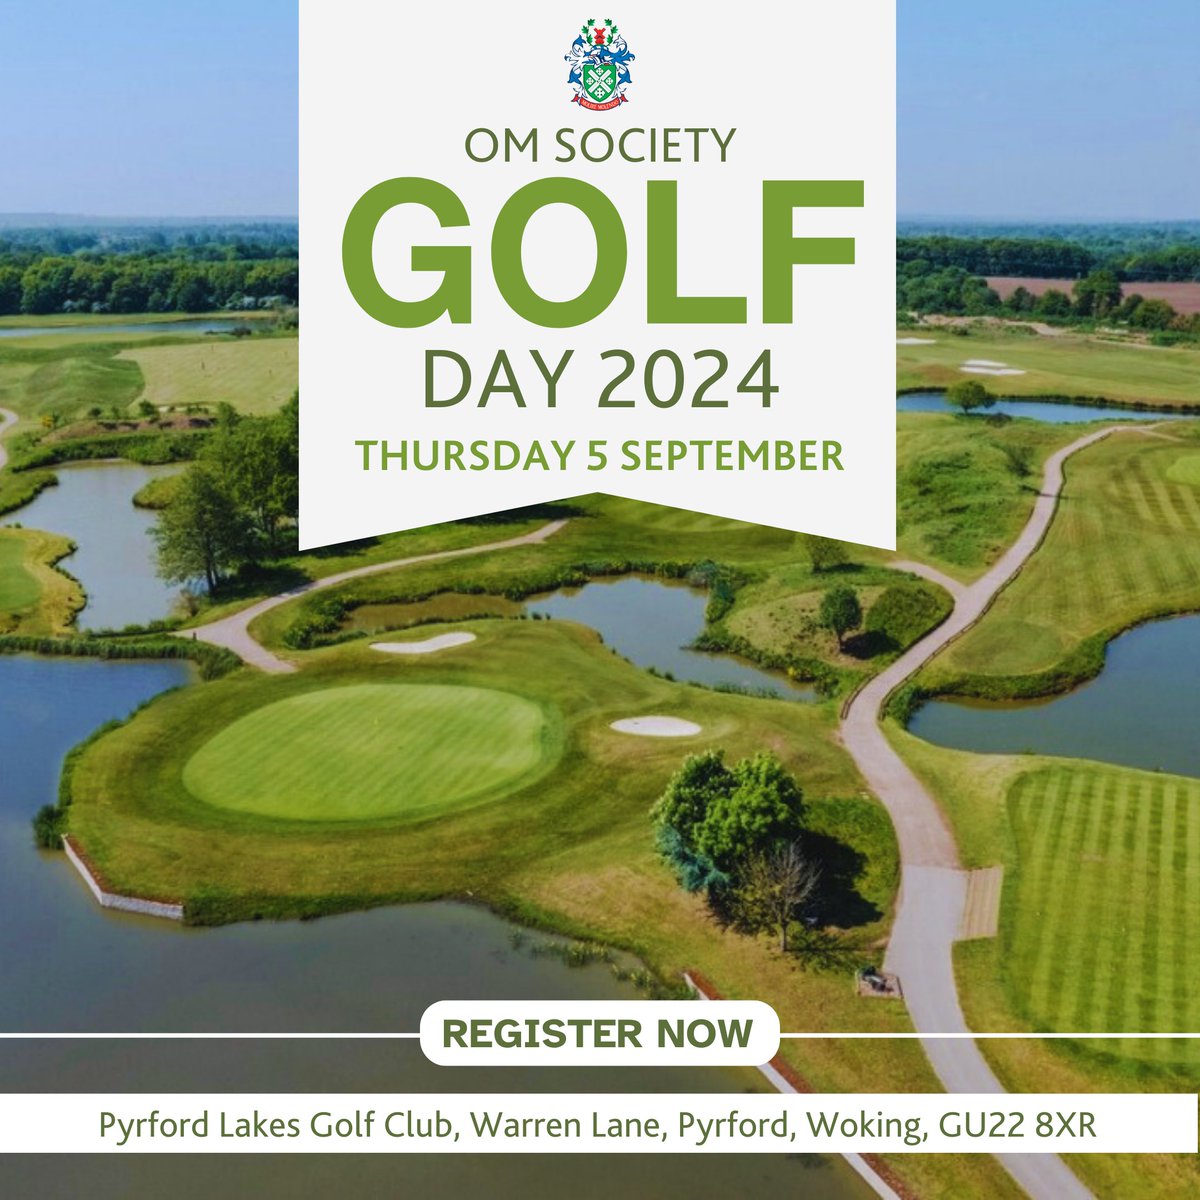 🏌️‍♂️OM Society’s 29th Annual Golf Day🏌️‍♂️ ⛳️We are excited to be hosting our 29th Annual Golf Day on Thursday 5 September at Pyrford Lakes Golf Club. ➡️For further information and to book tickets, please follow the link: trybooking.com/uk/DIFT